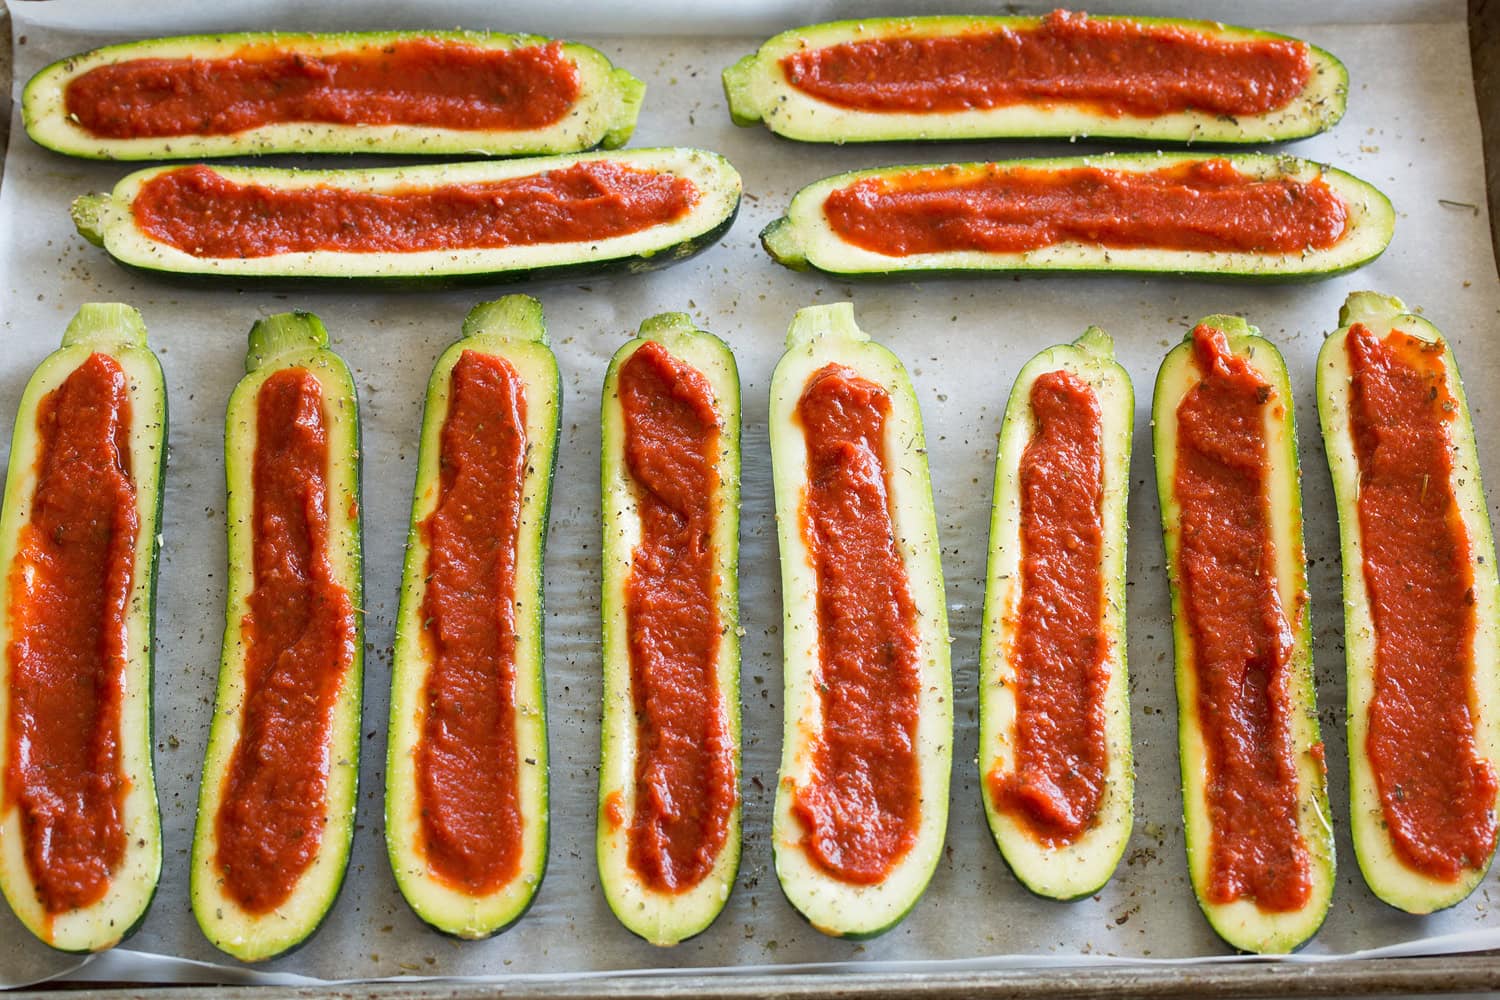 Zucchini portions with a pizza sauce filled center.